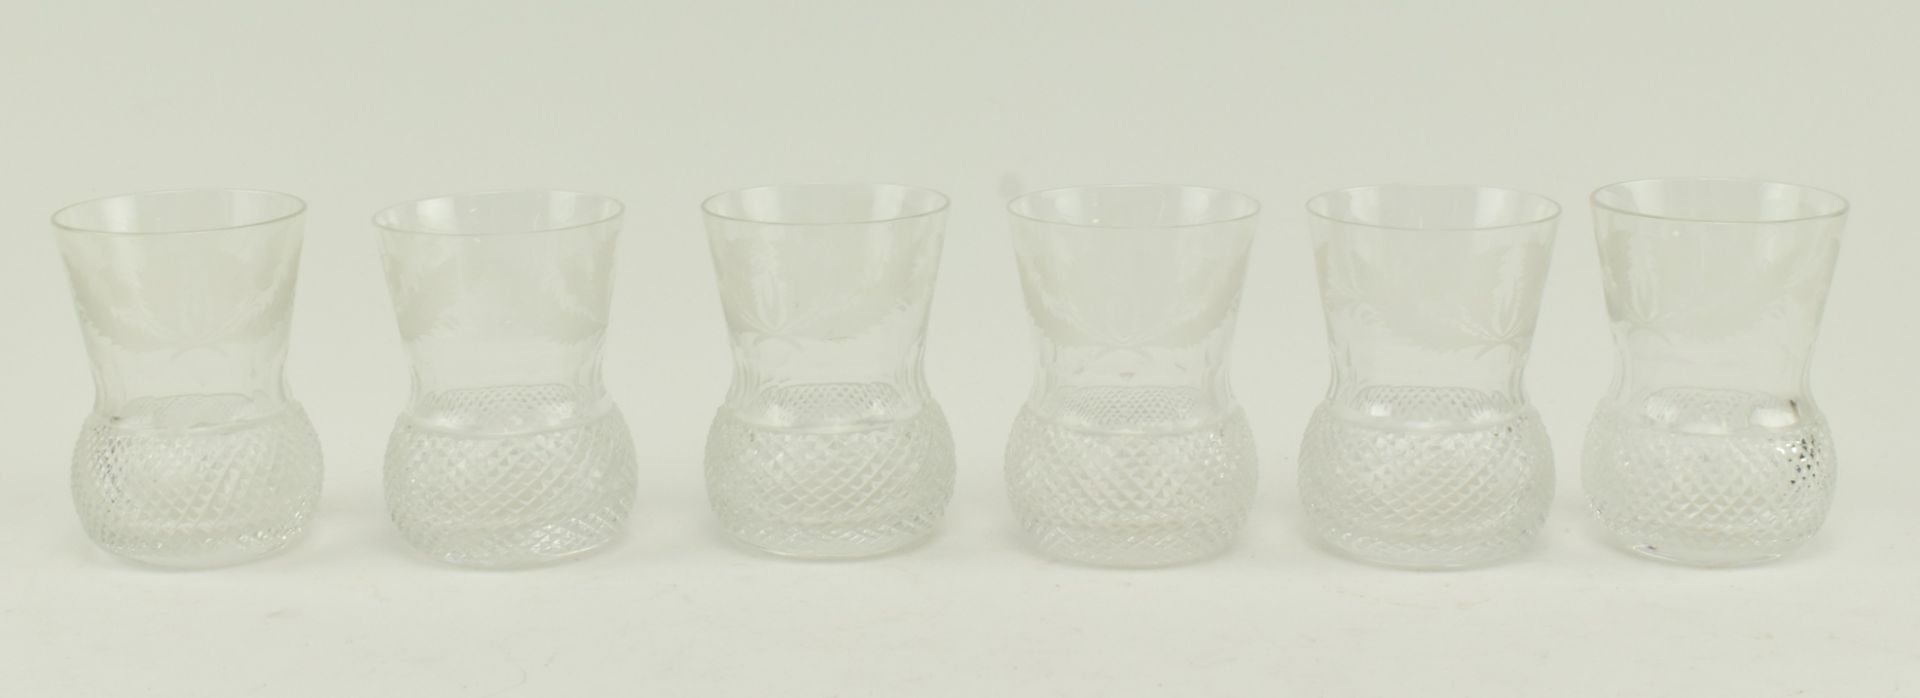 EDINBURGH CRYSTAL - SQUARE THISTLE DECANTER AND TUMBLERS - Image 4 of 6